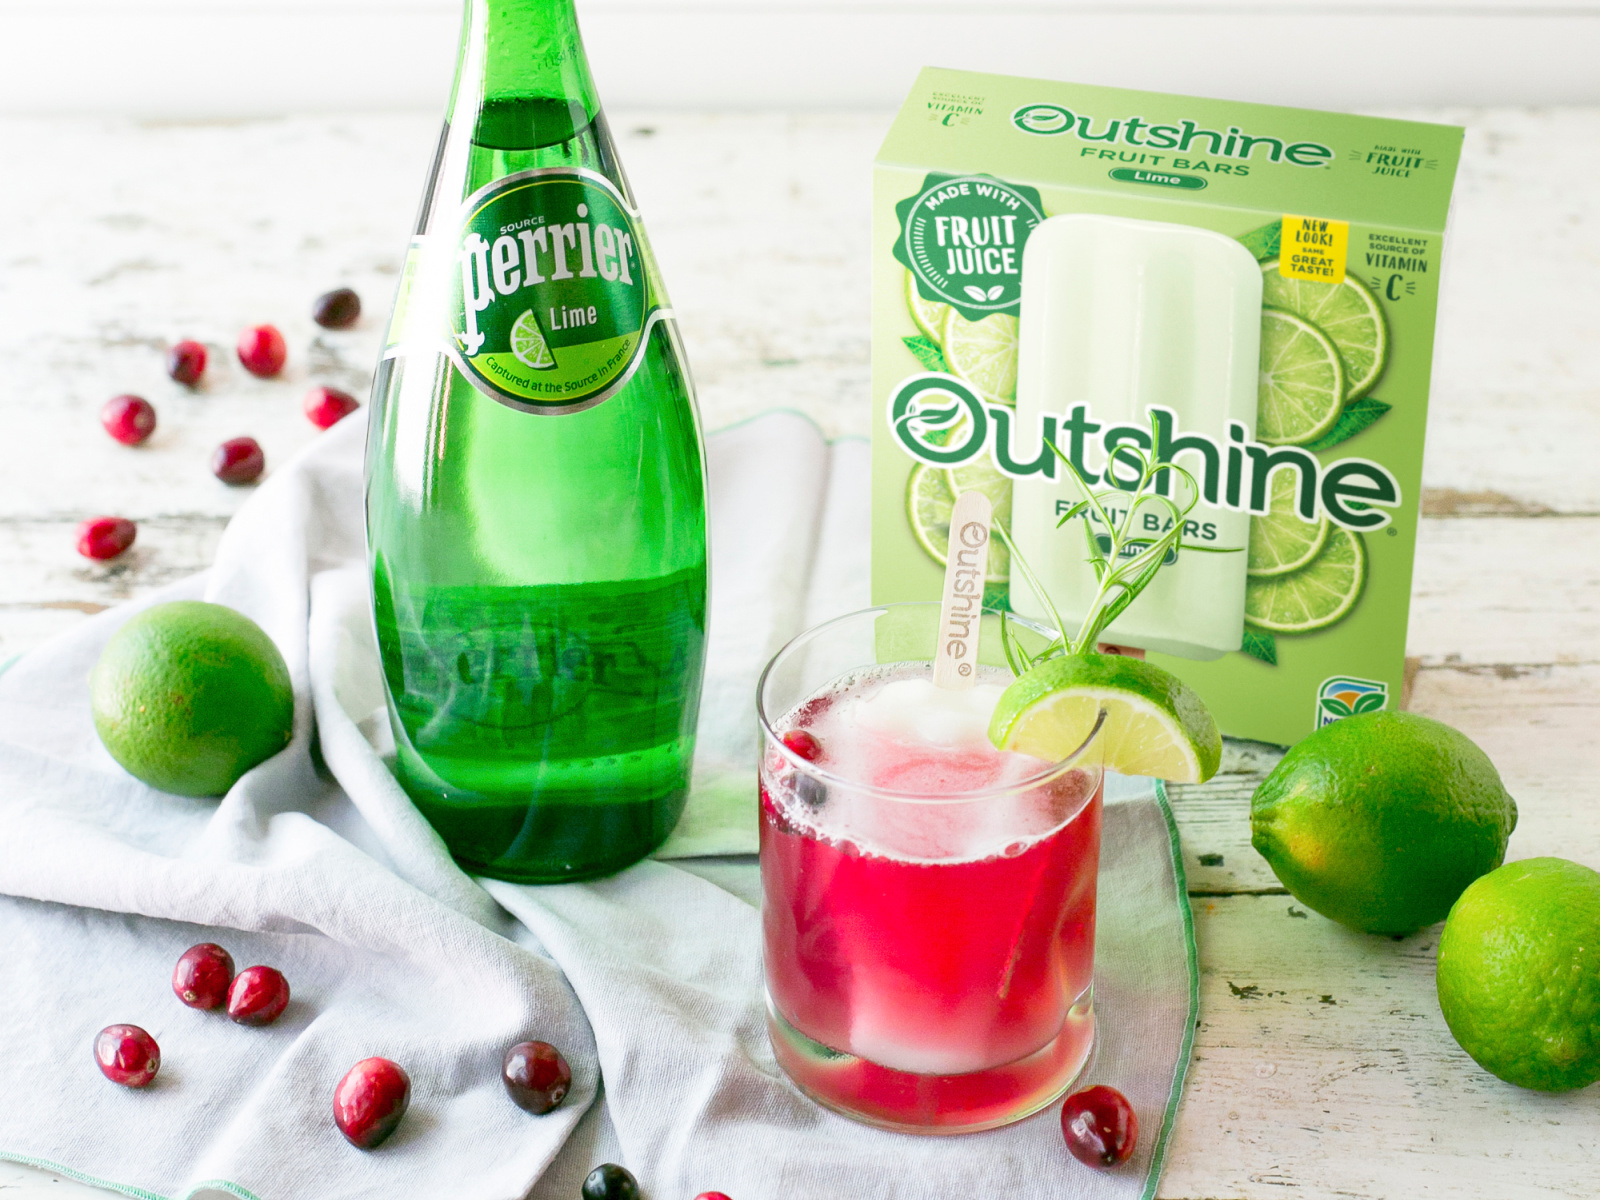 Outshine Bars As Low As $4 Per Box At Kroger